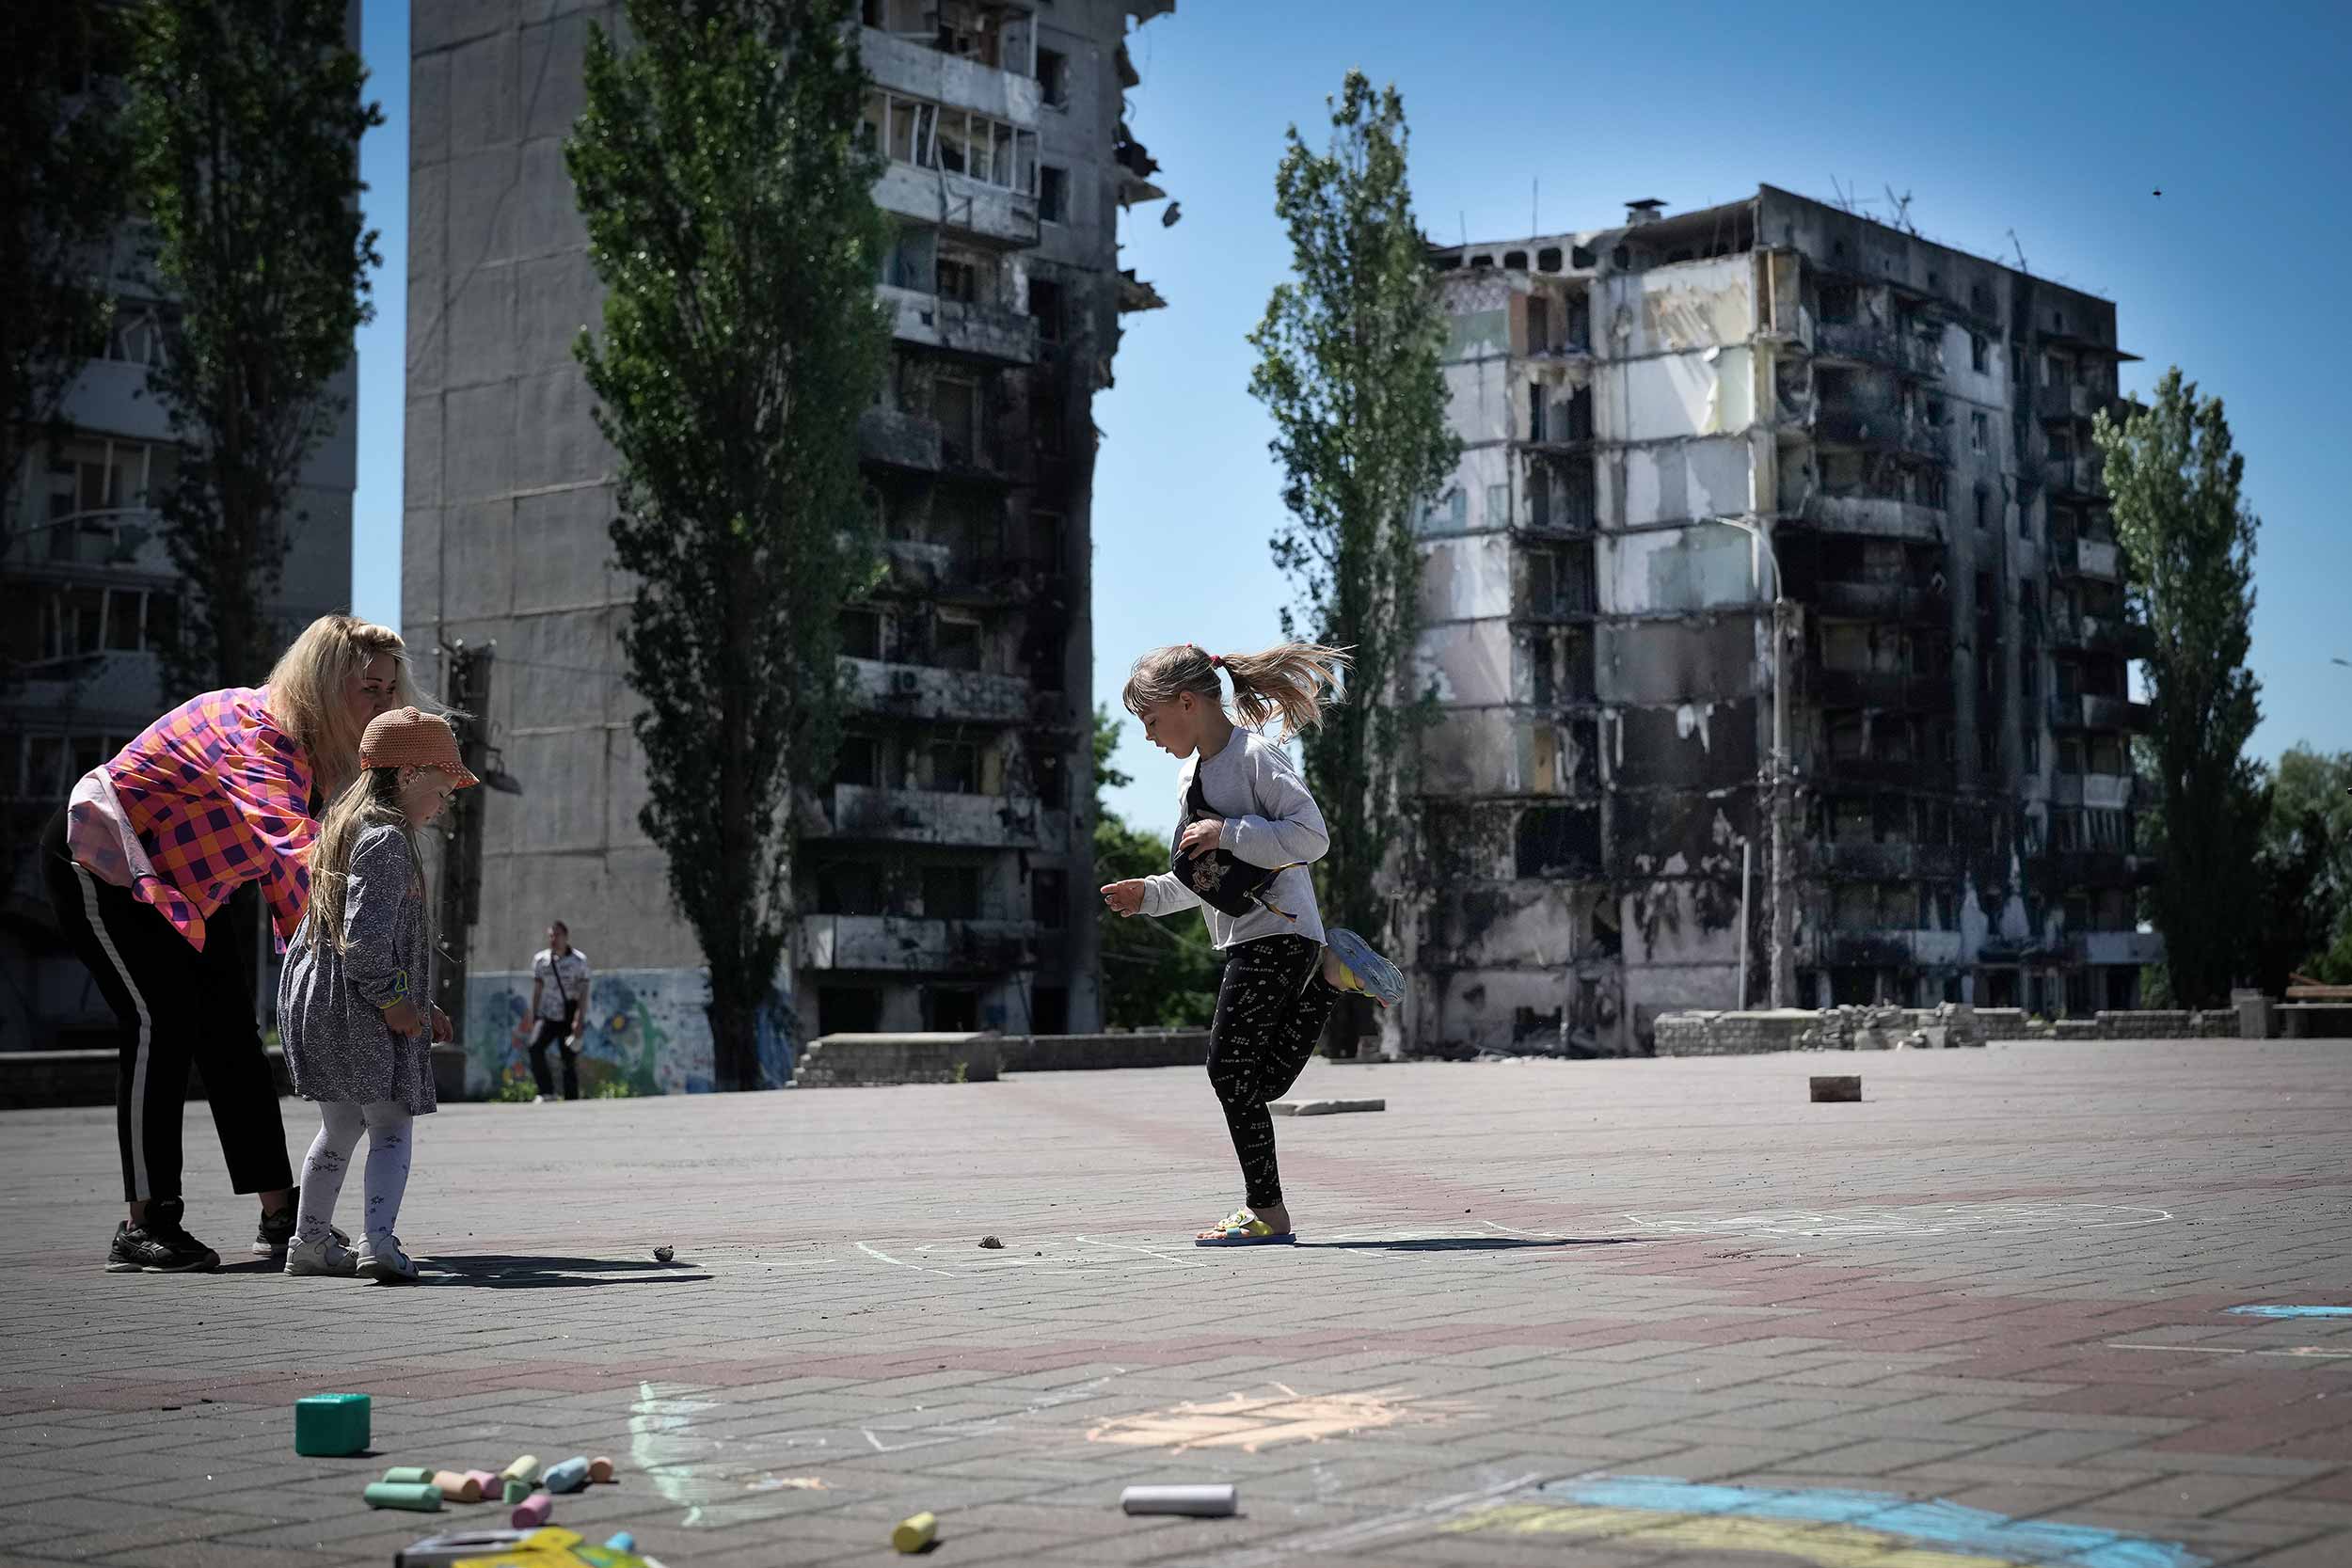 Volunteers from Borodianka community organise games and crafts for the children of the Kyiv suburb in the main square against the backdrop of a destroyed apartment blocks on June 03, 2022 in Borodianka, Ukraine. The small town was occupied and heavily damaged during the Russian invasion with many of the facilities for children destroyed. © Christopher Furlong/Getty Images